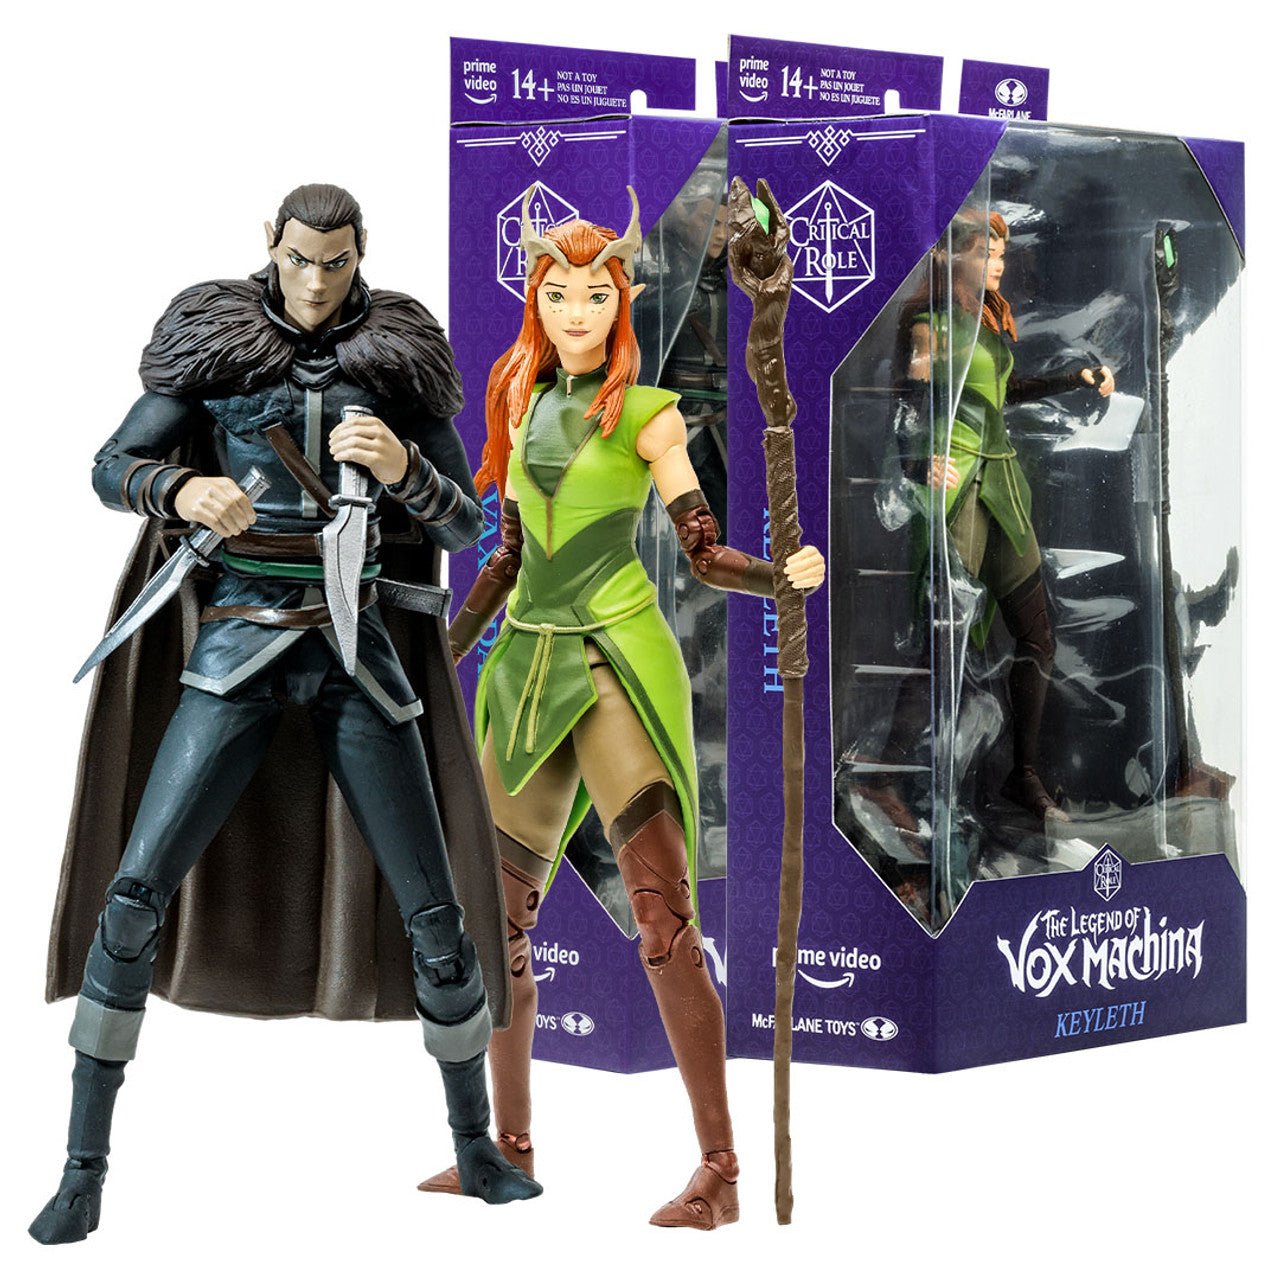 Legend of Vox Machina Wave 2 7-Inch Scale Figure (1 of 2) - The Fourth Place